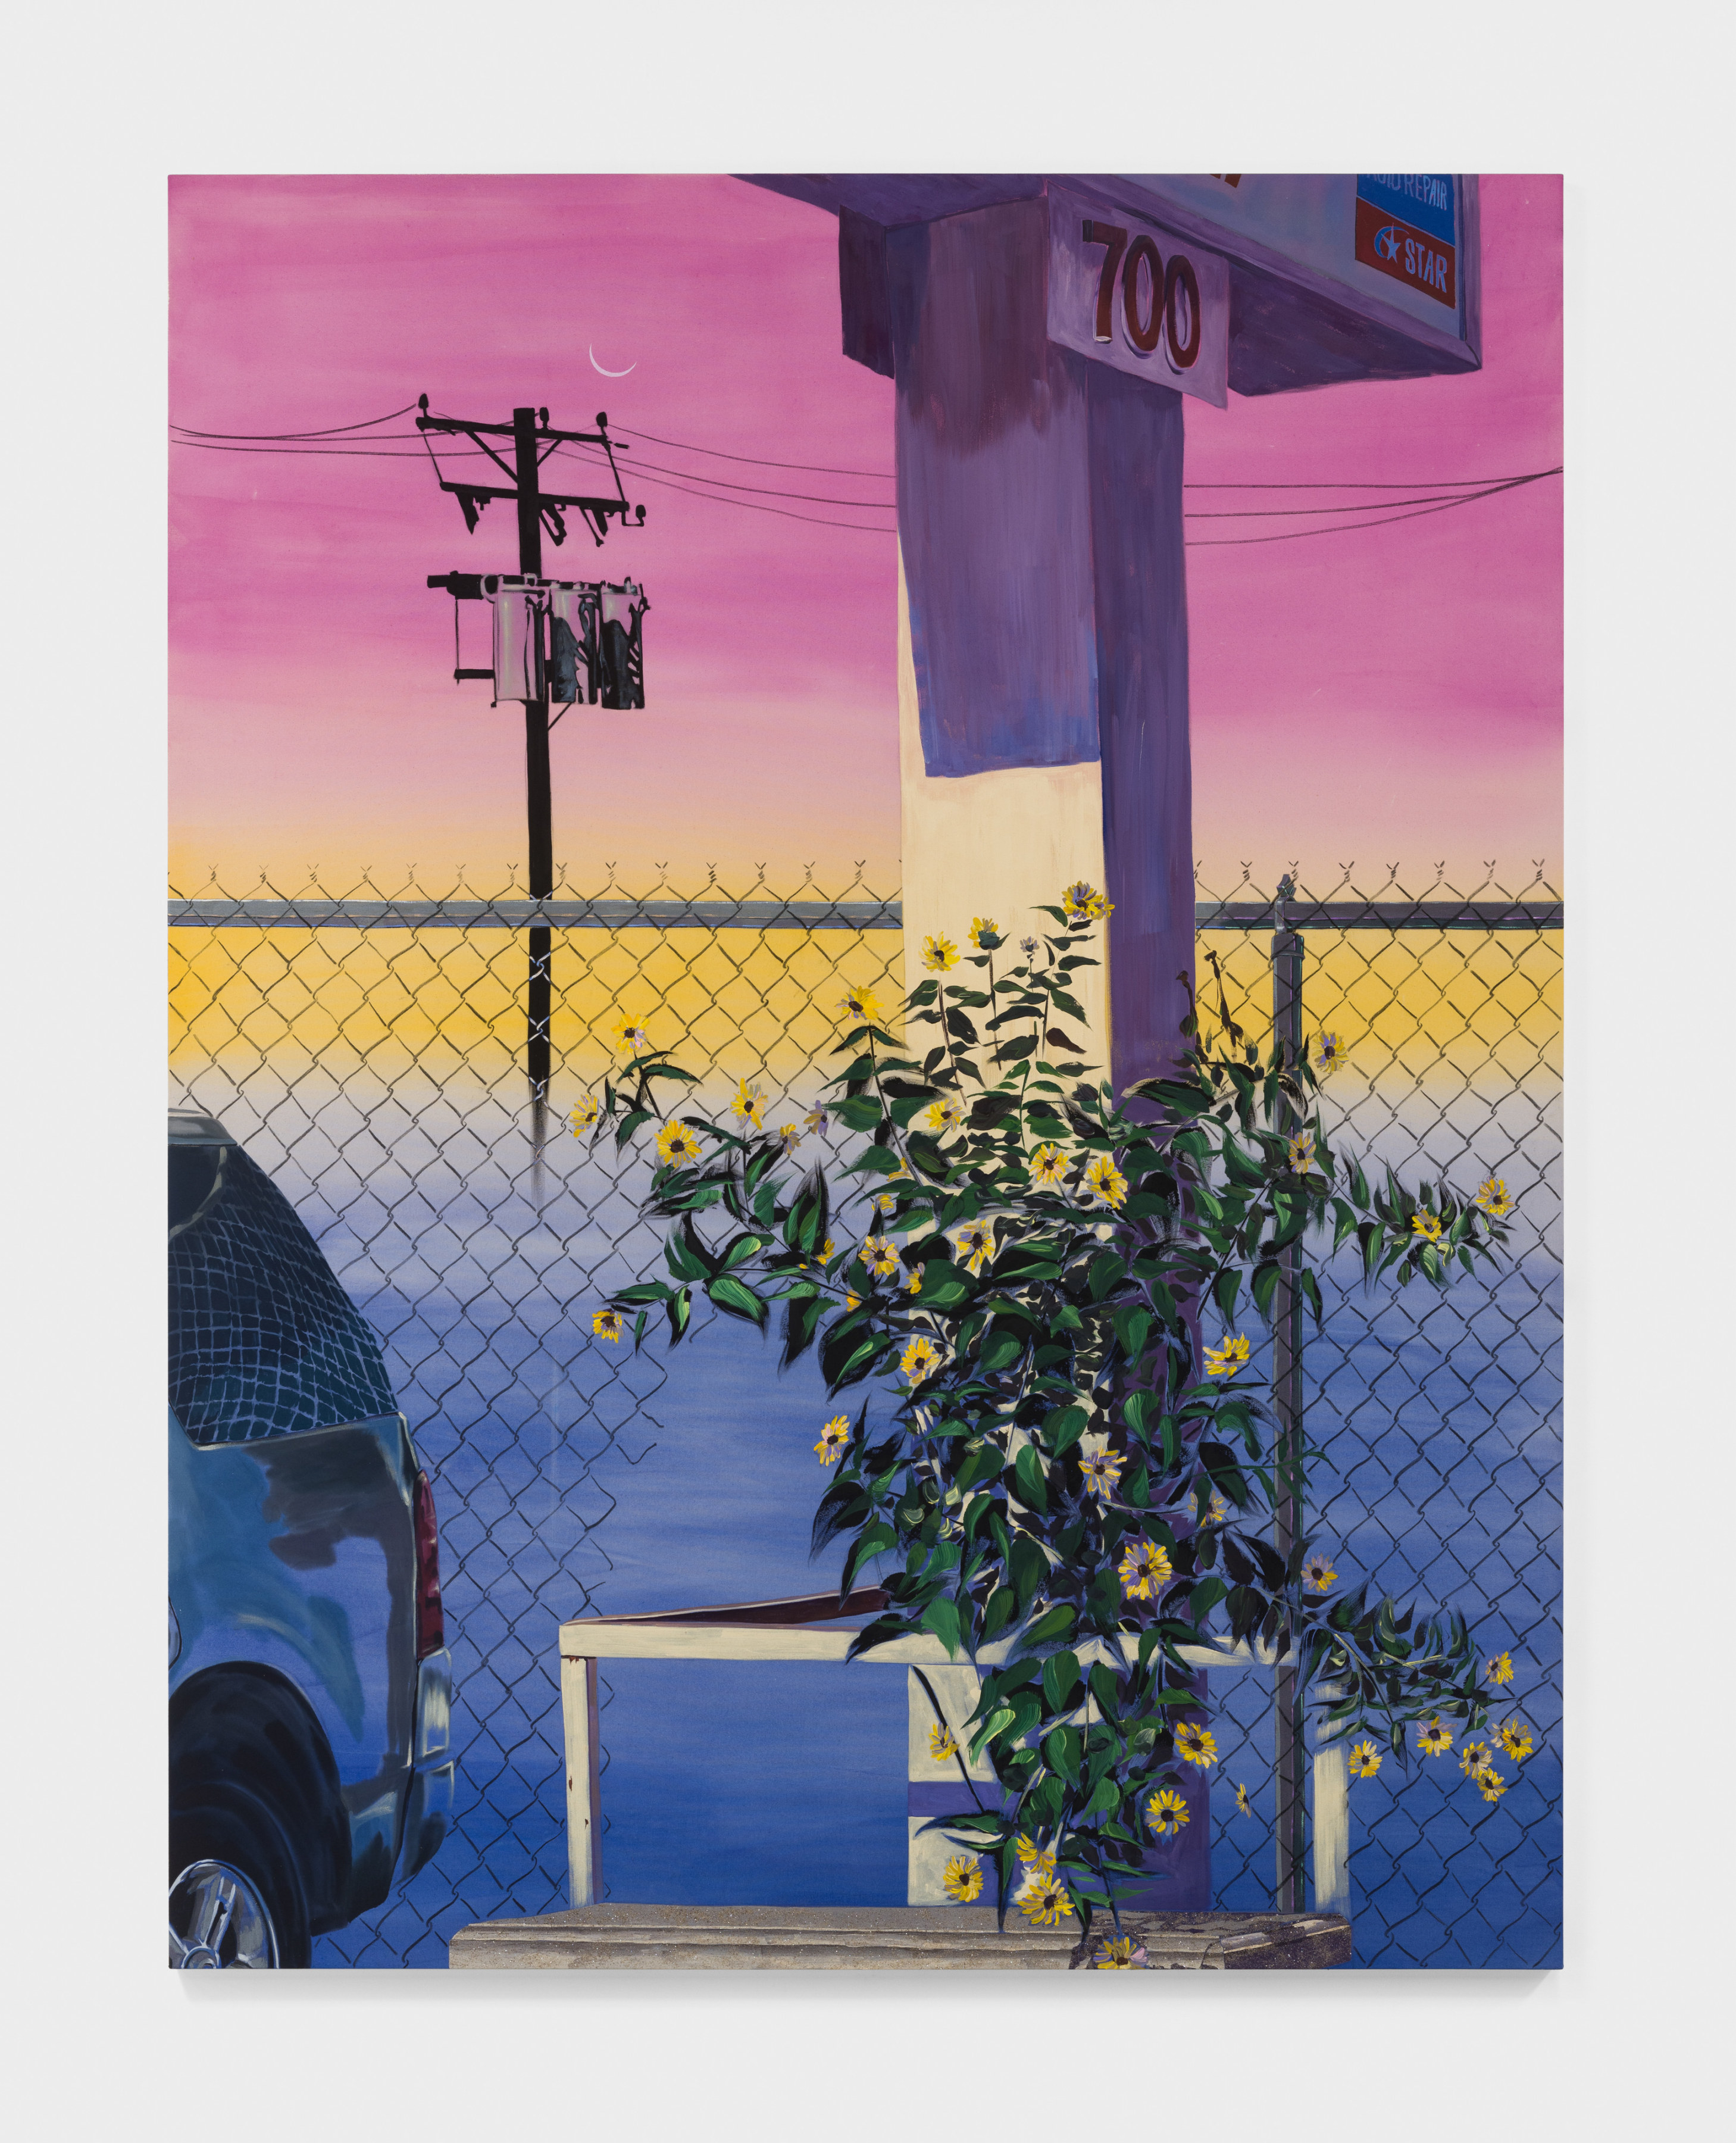 A painting by Tidawhitney Lek depicting a parking lot with a bush of yellow daisies sprouting out from beside a sign post and a parked car against a background of a ruptured wire fence and a sunset in gradient blues, yellows and pinks.